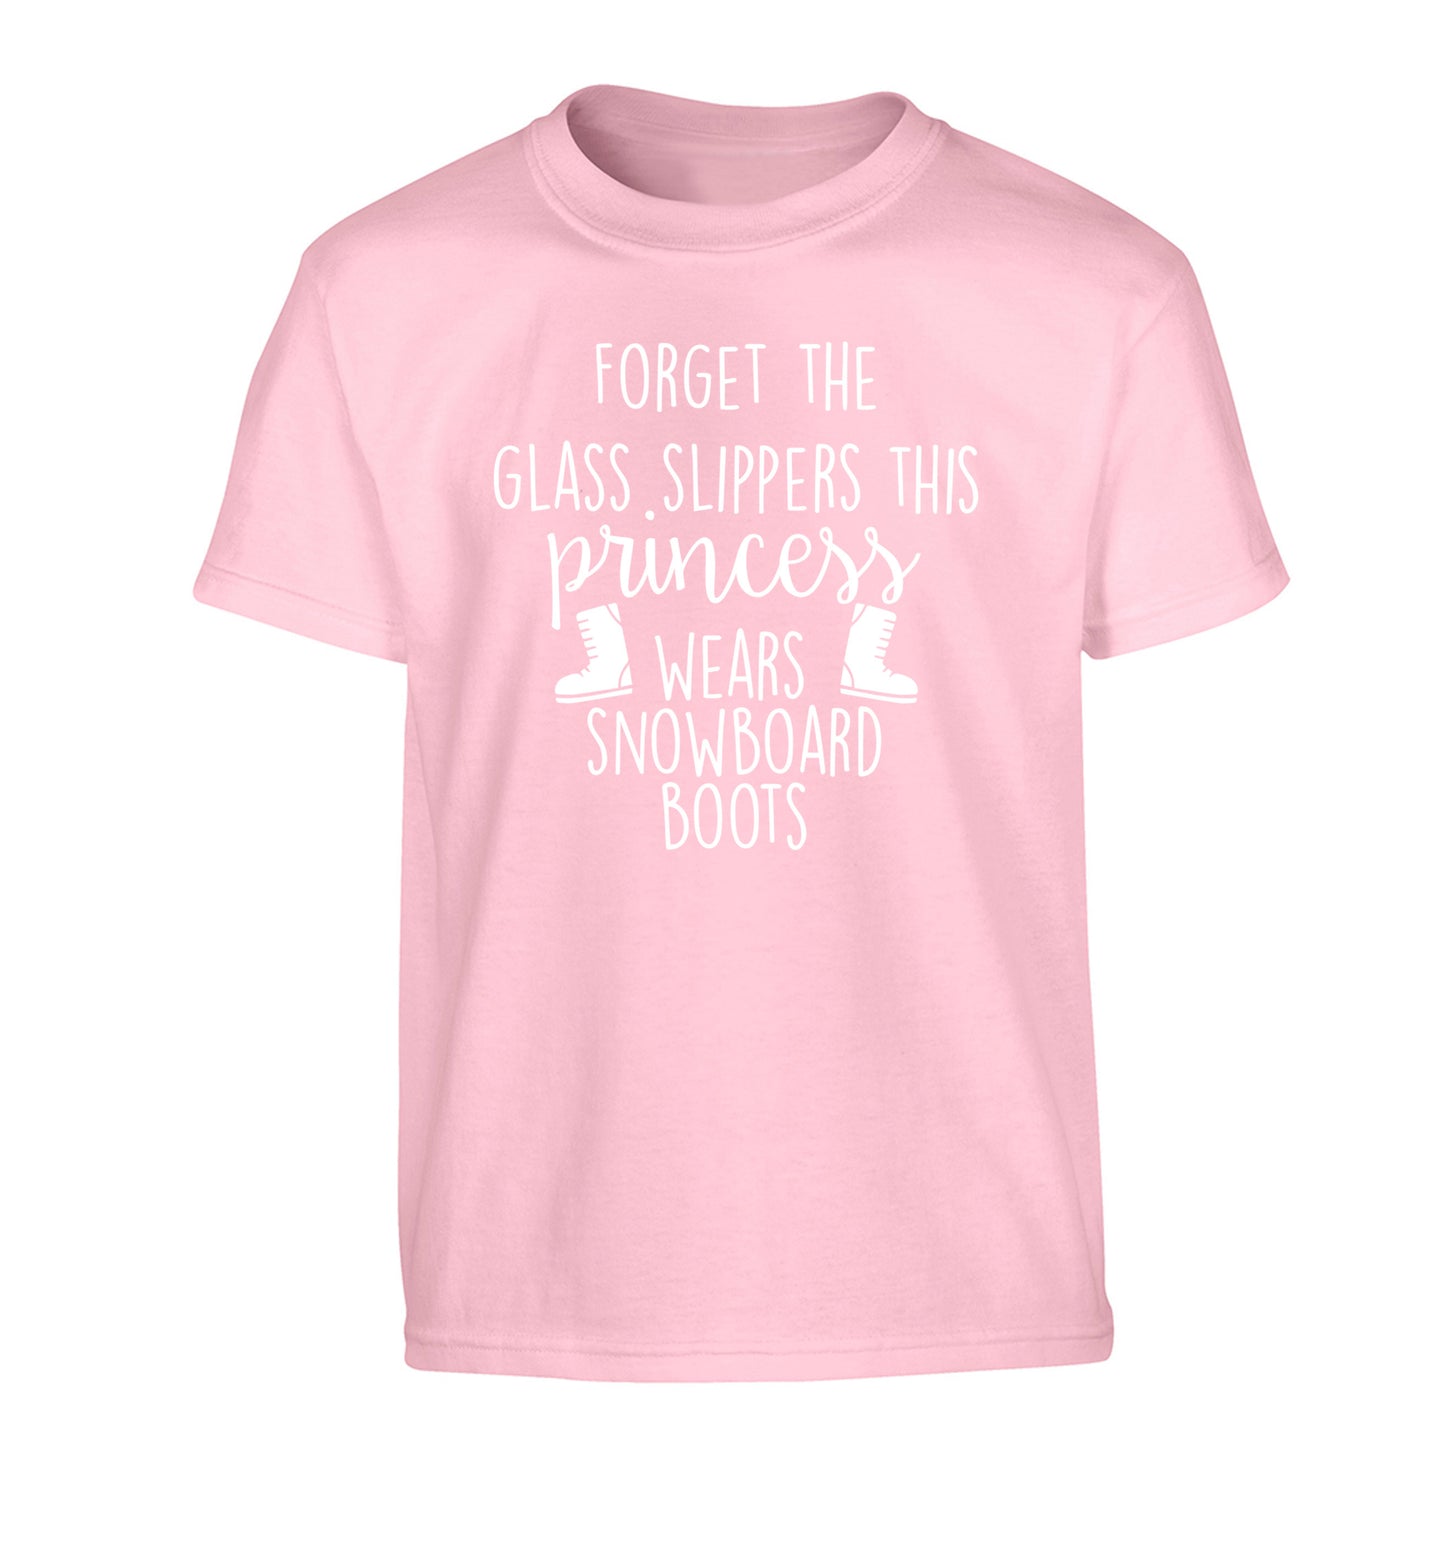 Forget the glass slippers this princess wears snowboard boots Children's light pink Tshirt 12-14 Years